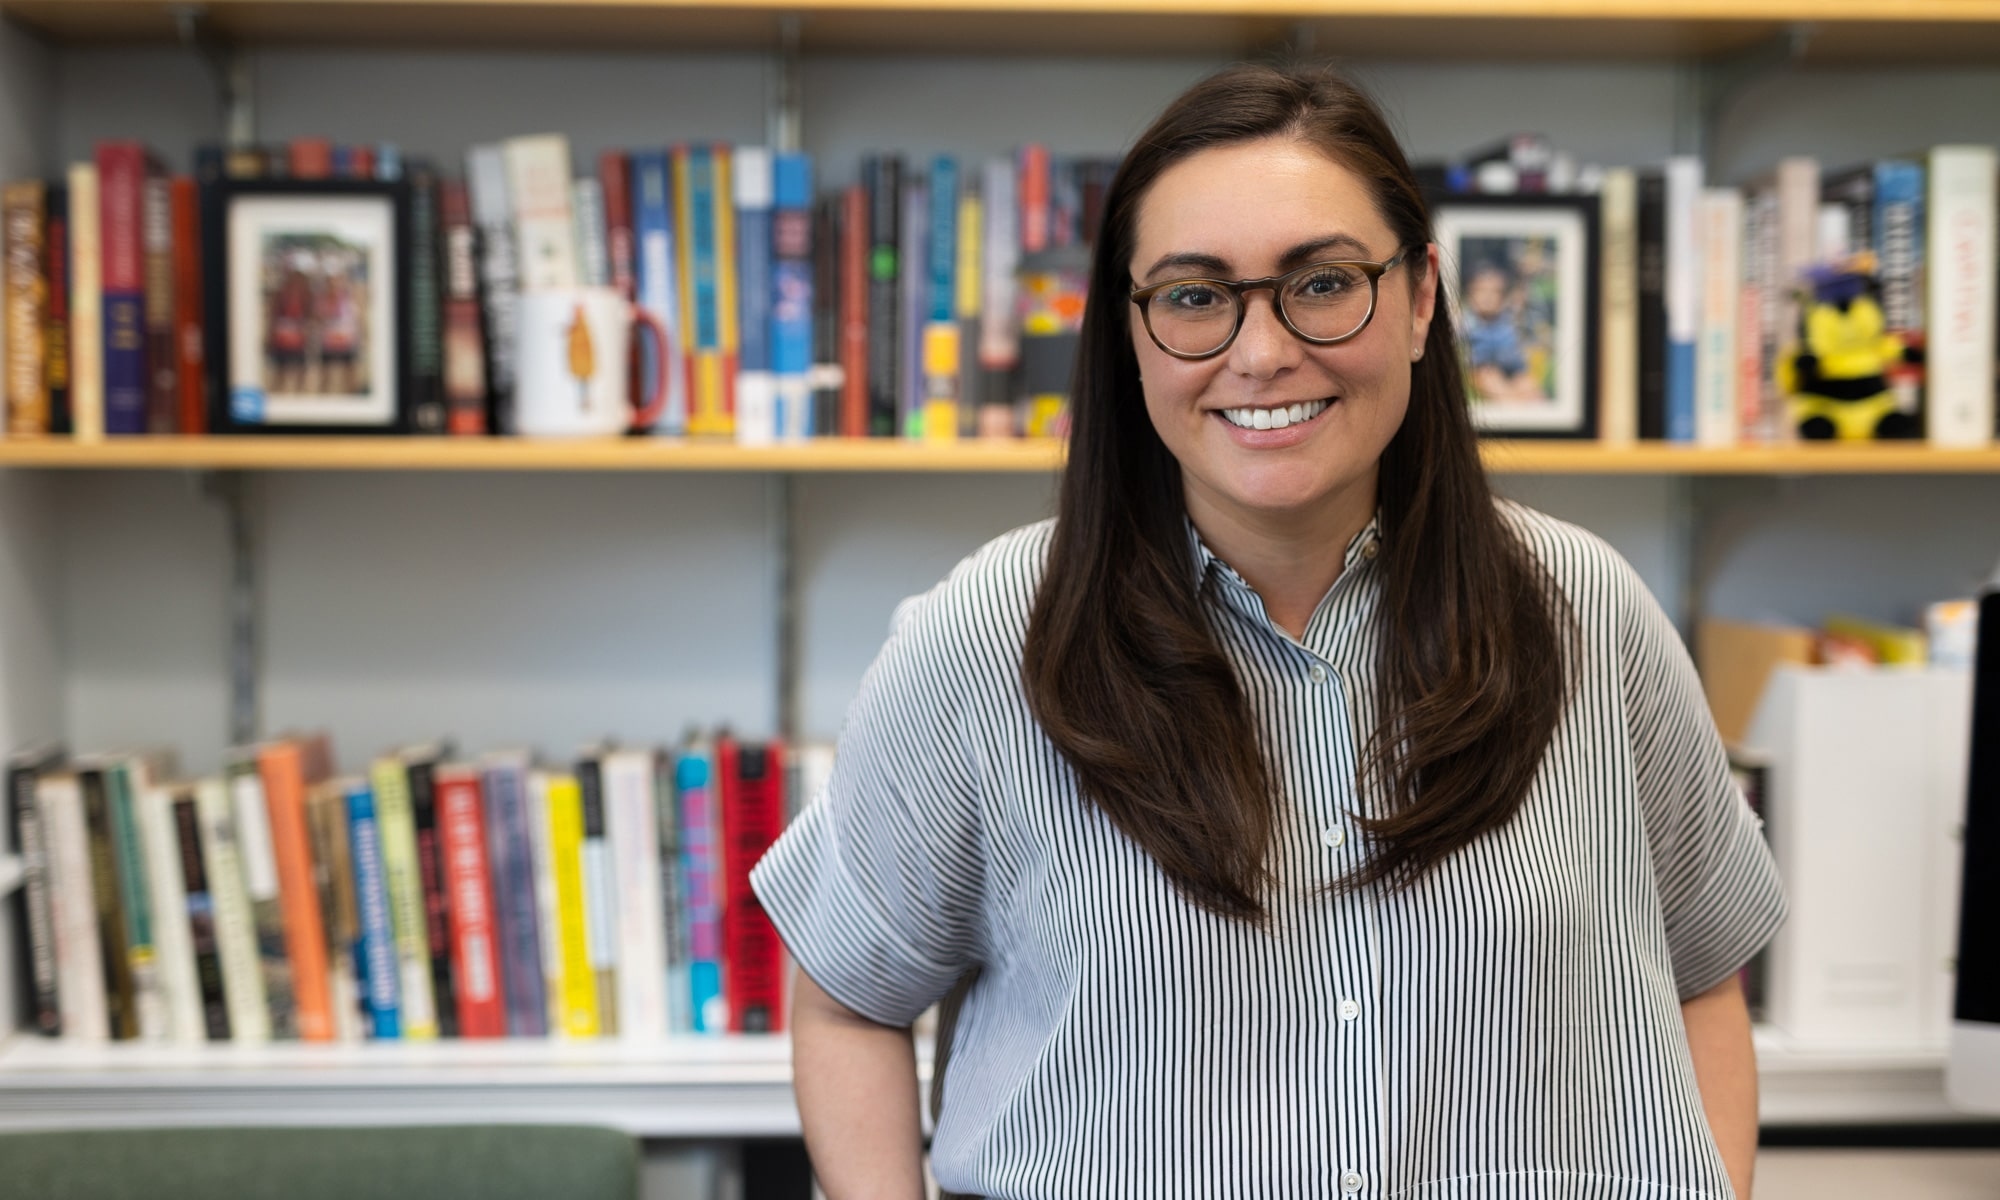 Assistant Professor Jessica Burch arrived at Denison in 2019.